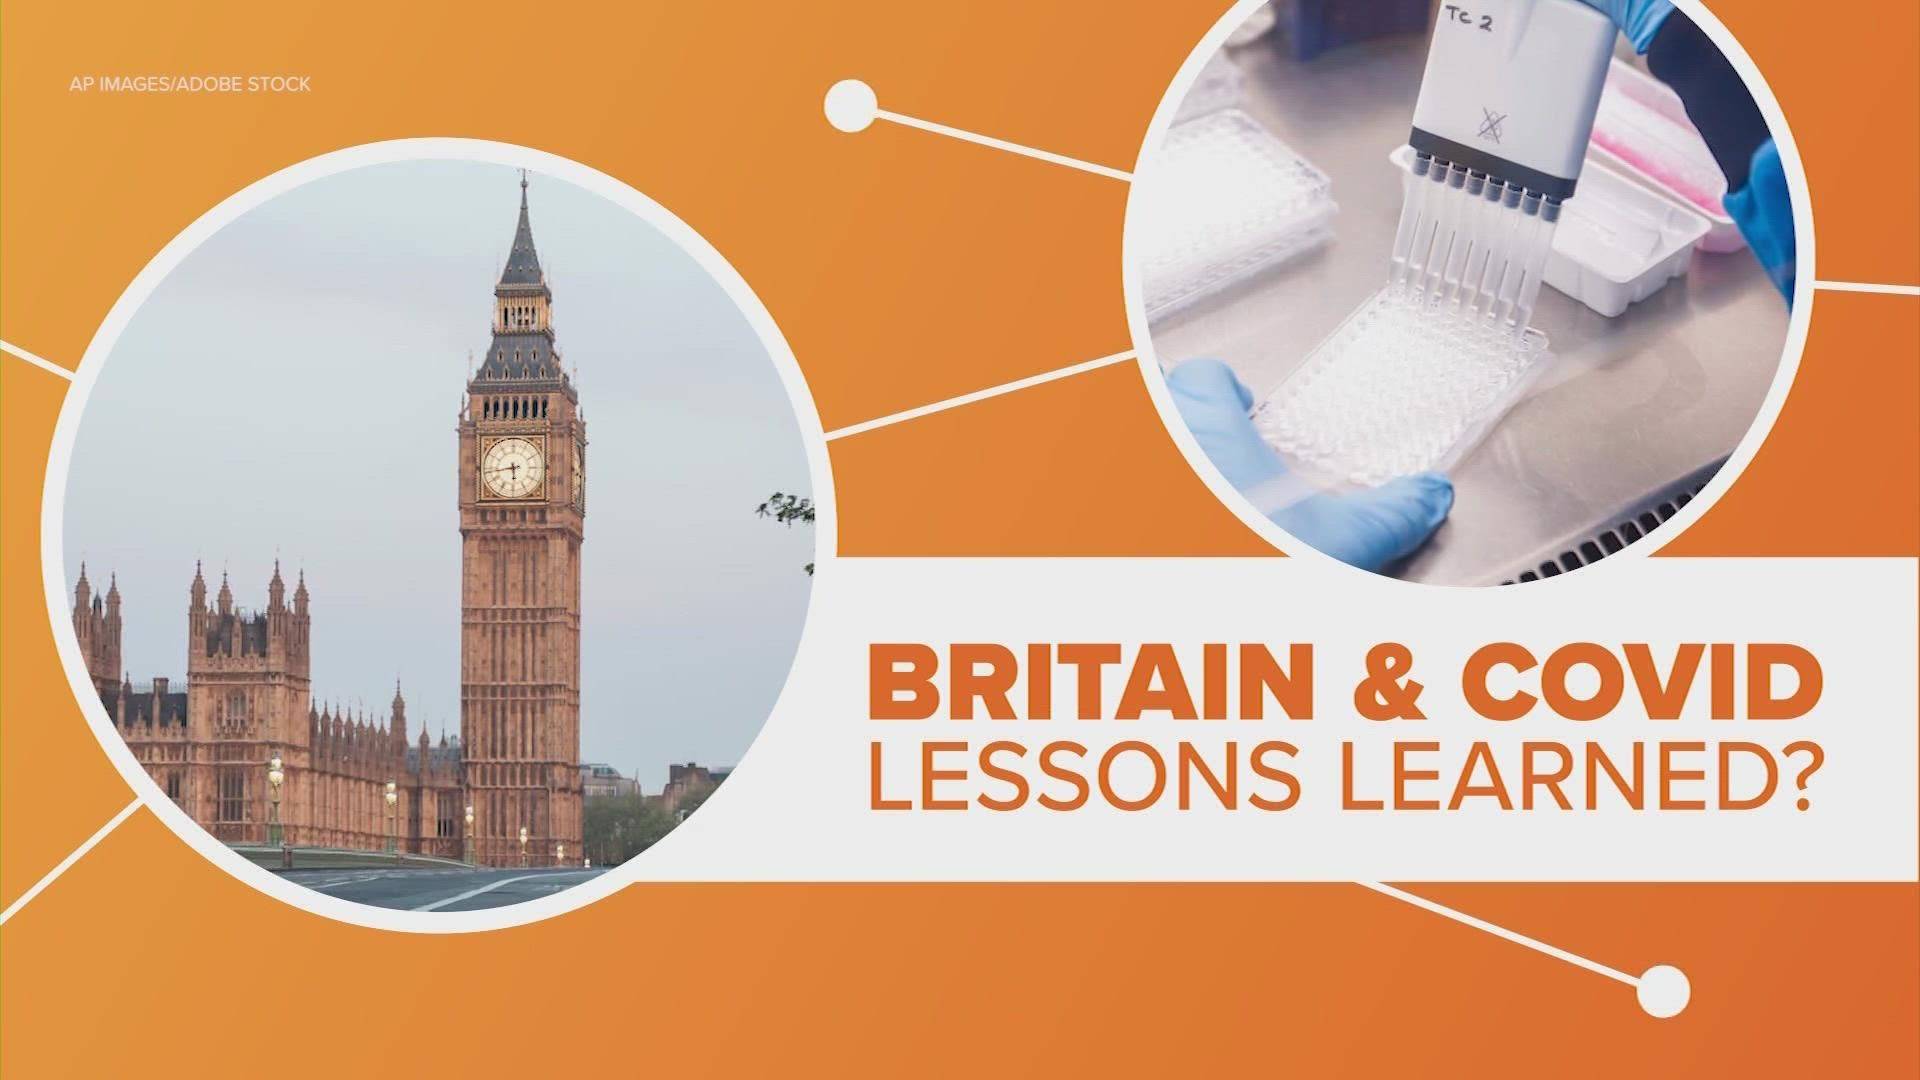 When it comes to COVID Britain is proving the experts wrong. So what can we learn from our neighbors across the pond? Let’s connect the dots.